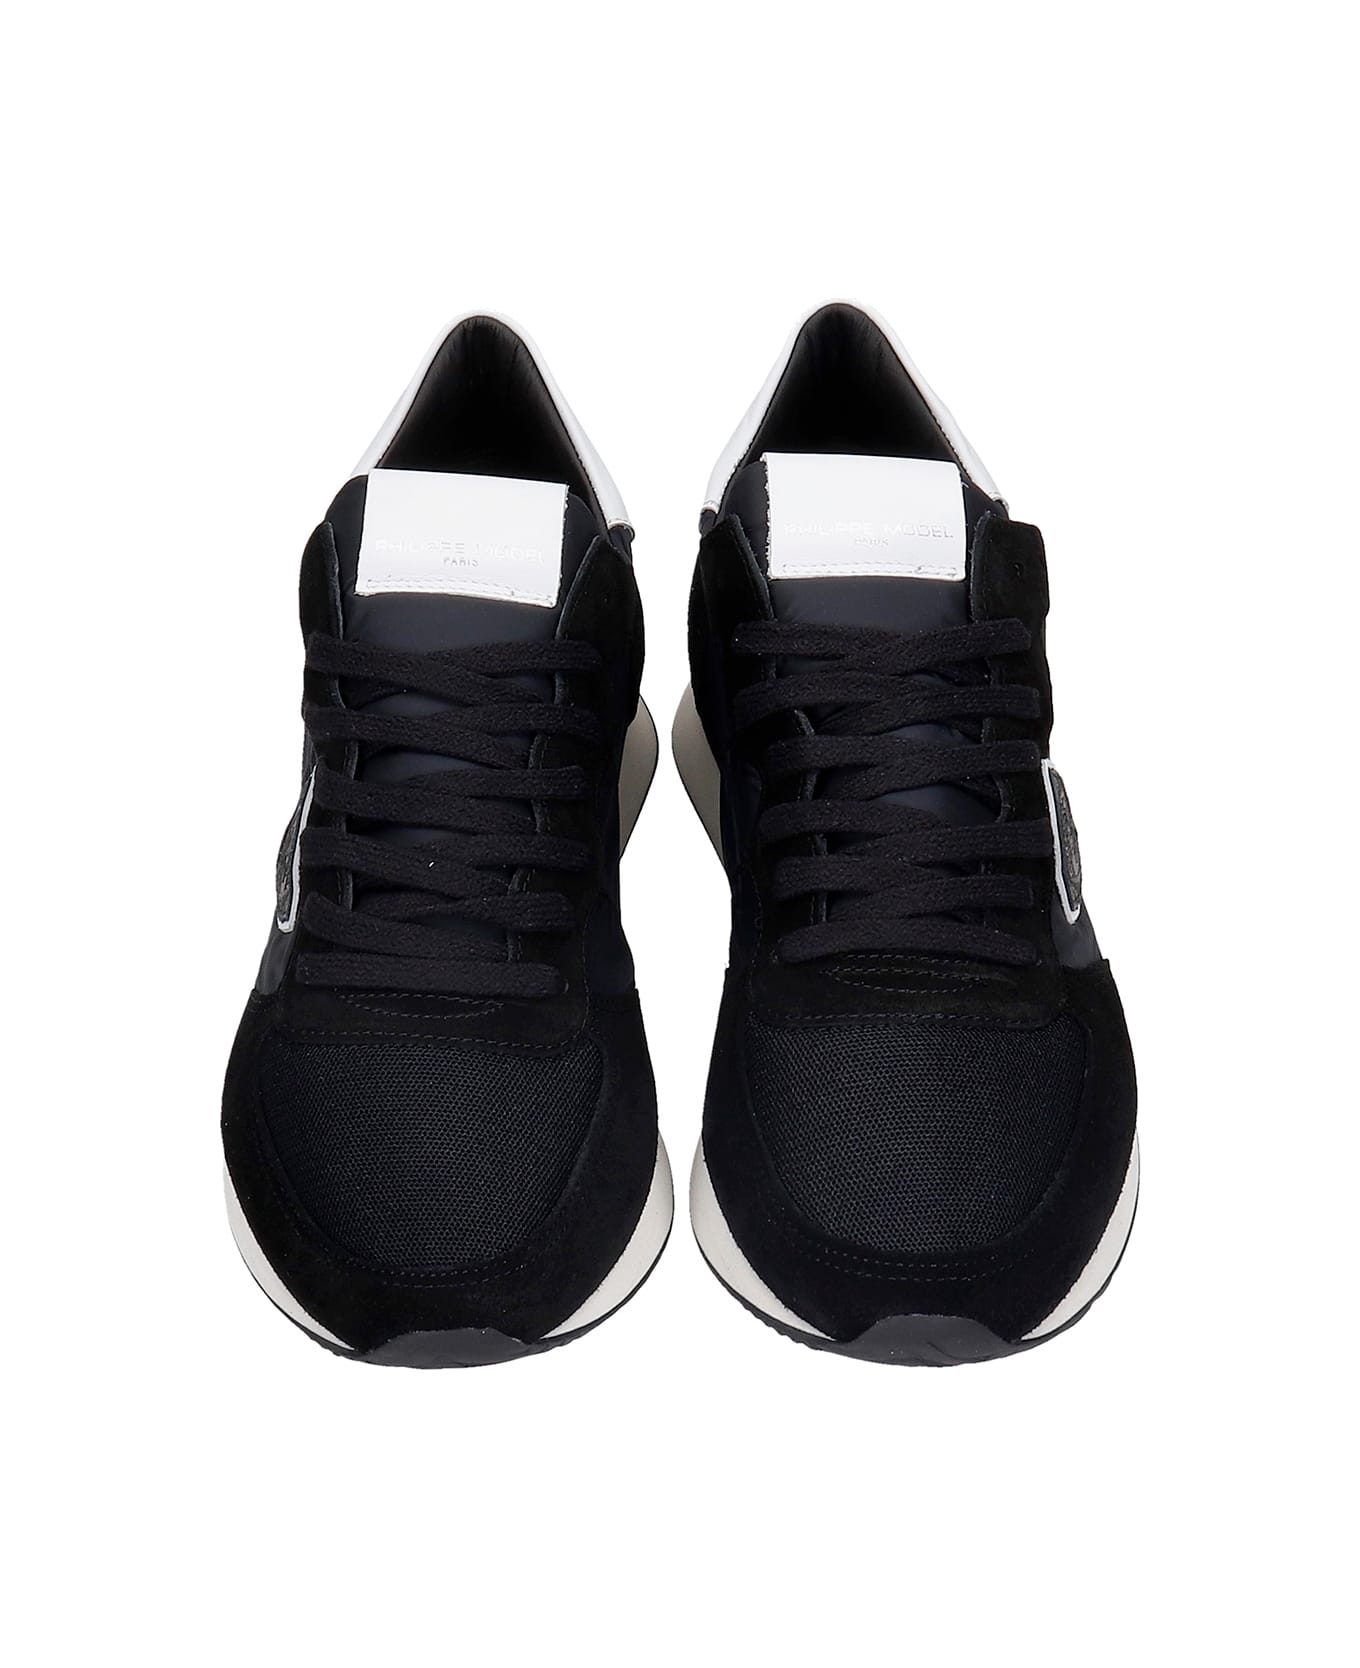 Philippe Model Trpx Sneakers In Black Suede And Fabric - BLACK スニーカー